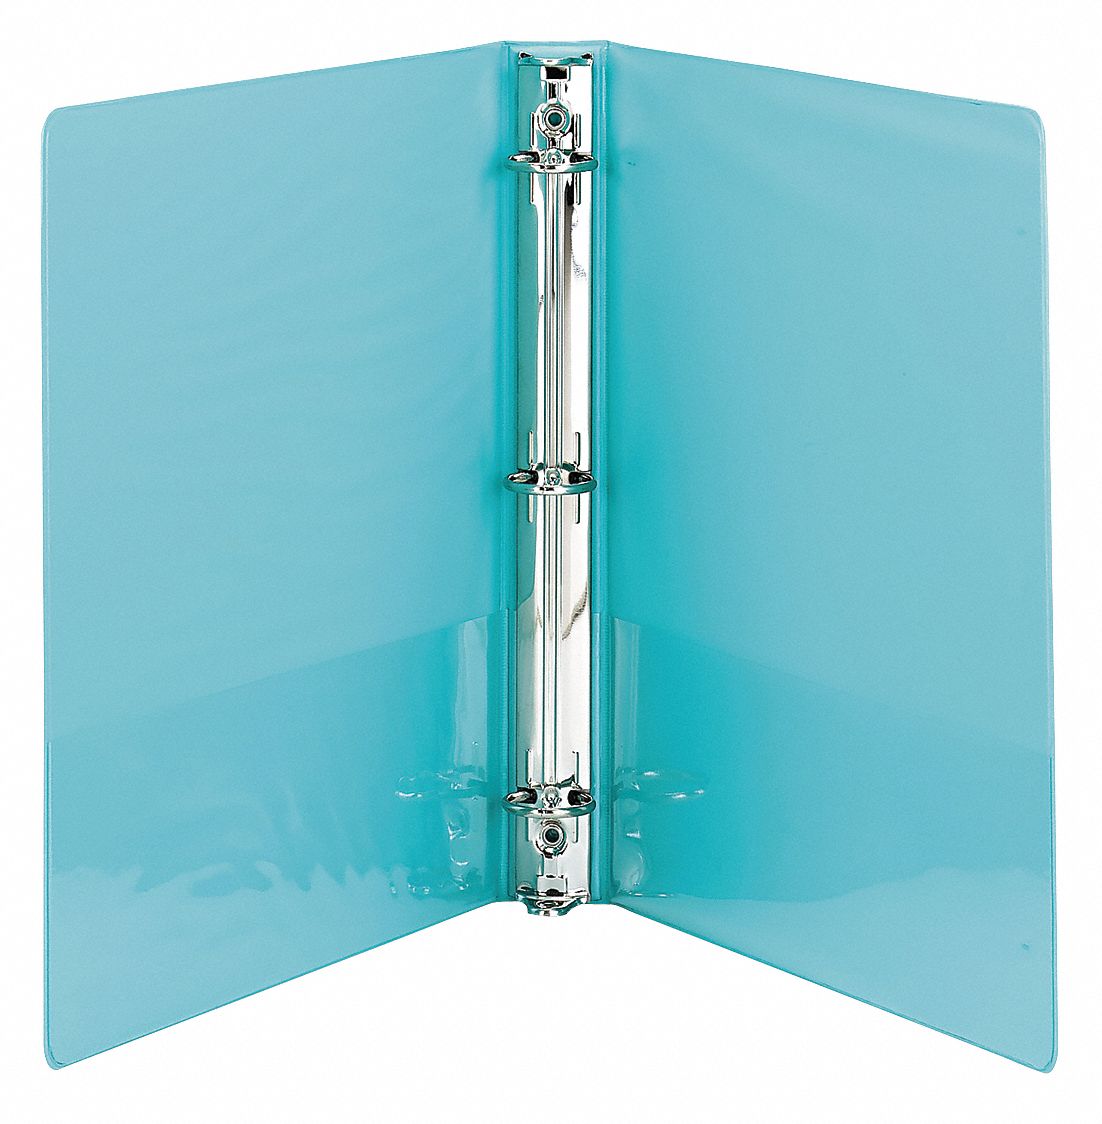 ESD Binders, 3 Ring, 3 Spine, Blue, Static Dissipative, AR-SDB-3 -  Cleanroom World